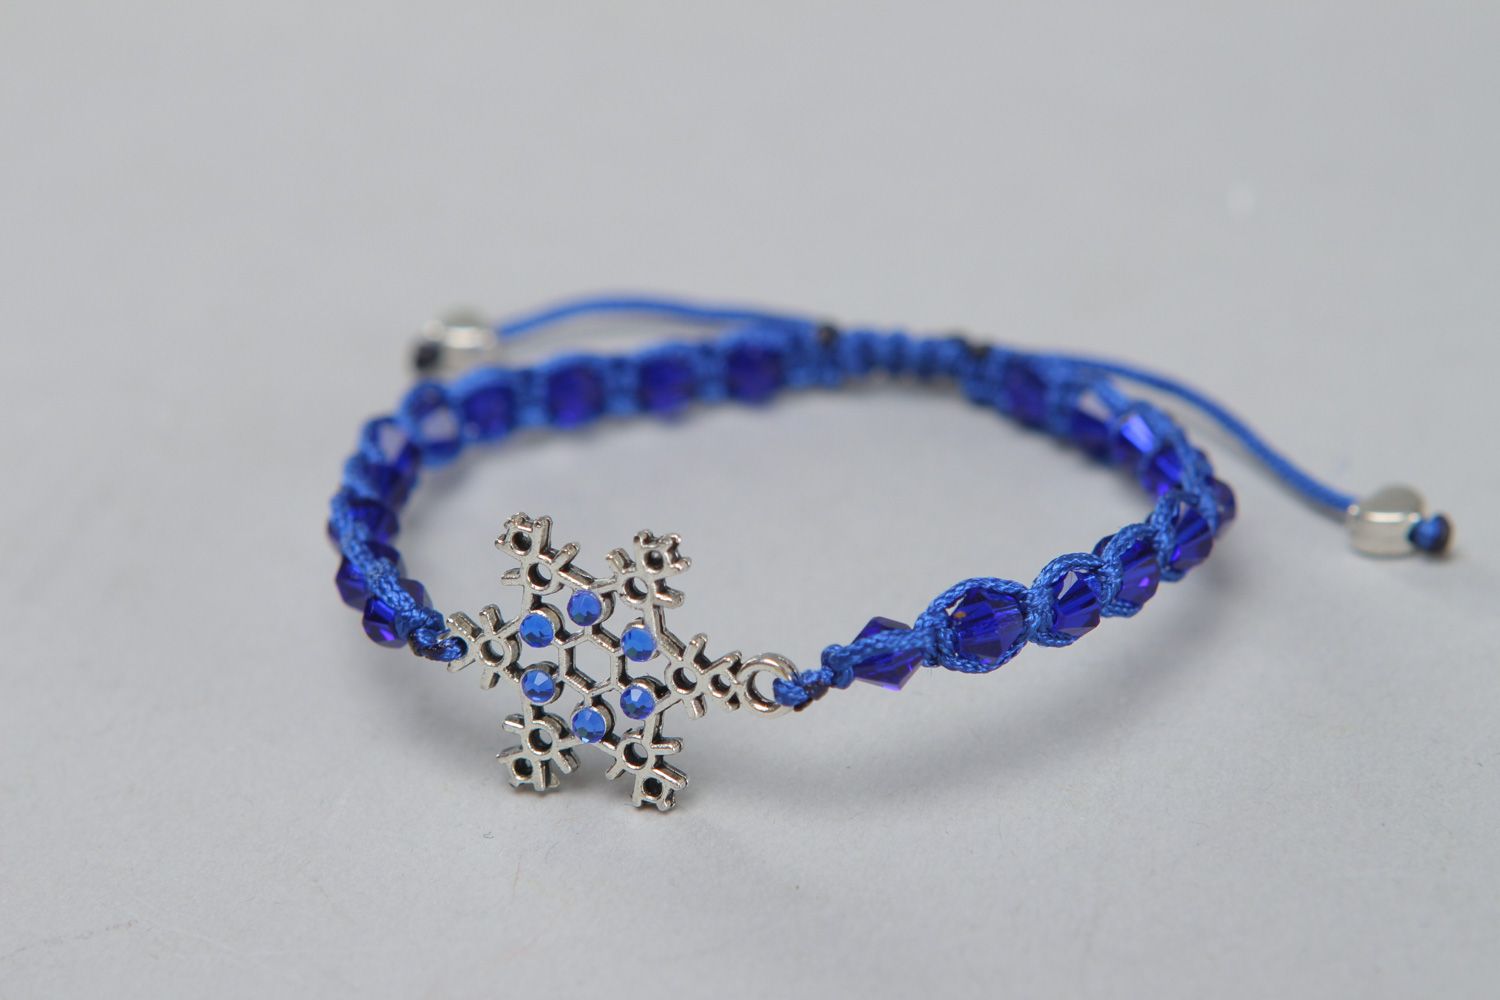 Handmade friendship bracelet woven of cord with crystal beads and metal snowflake photo 1